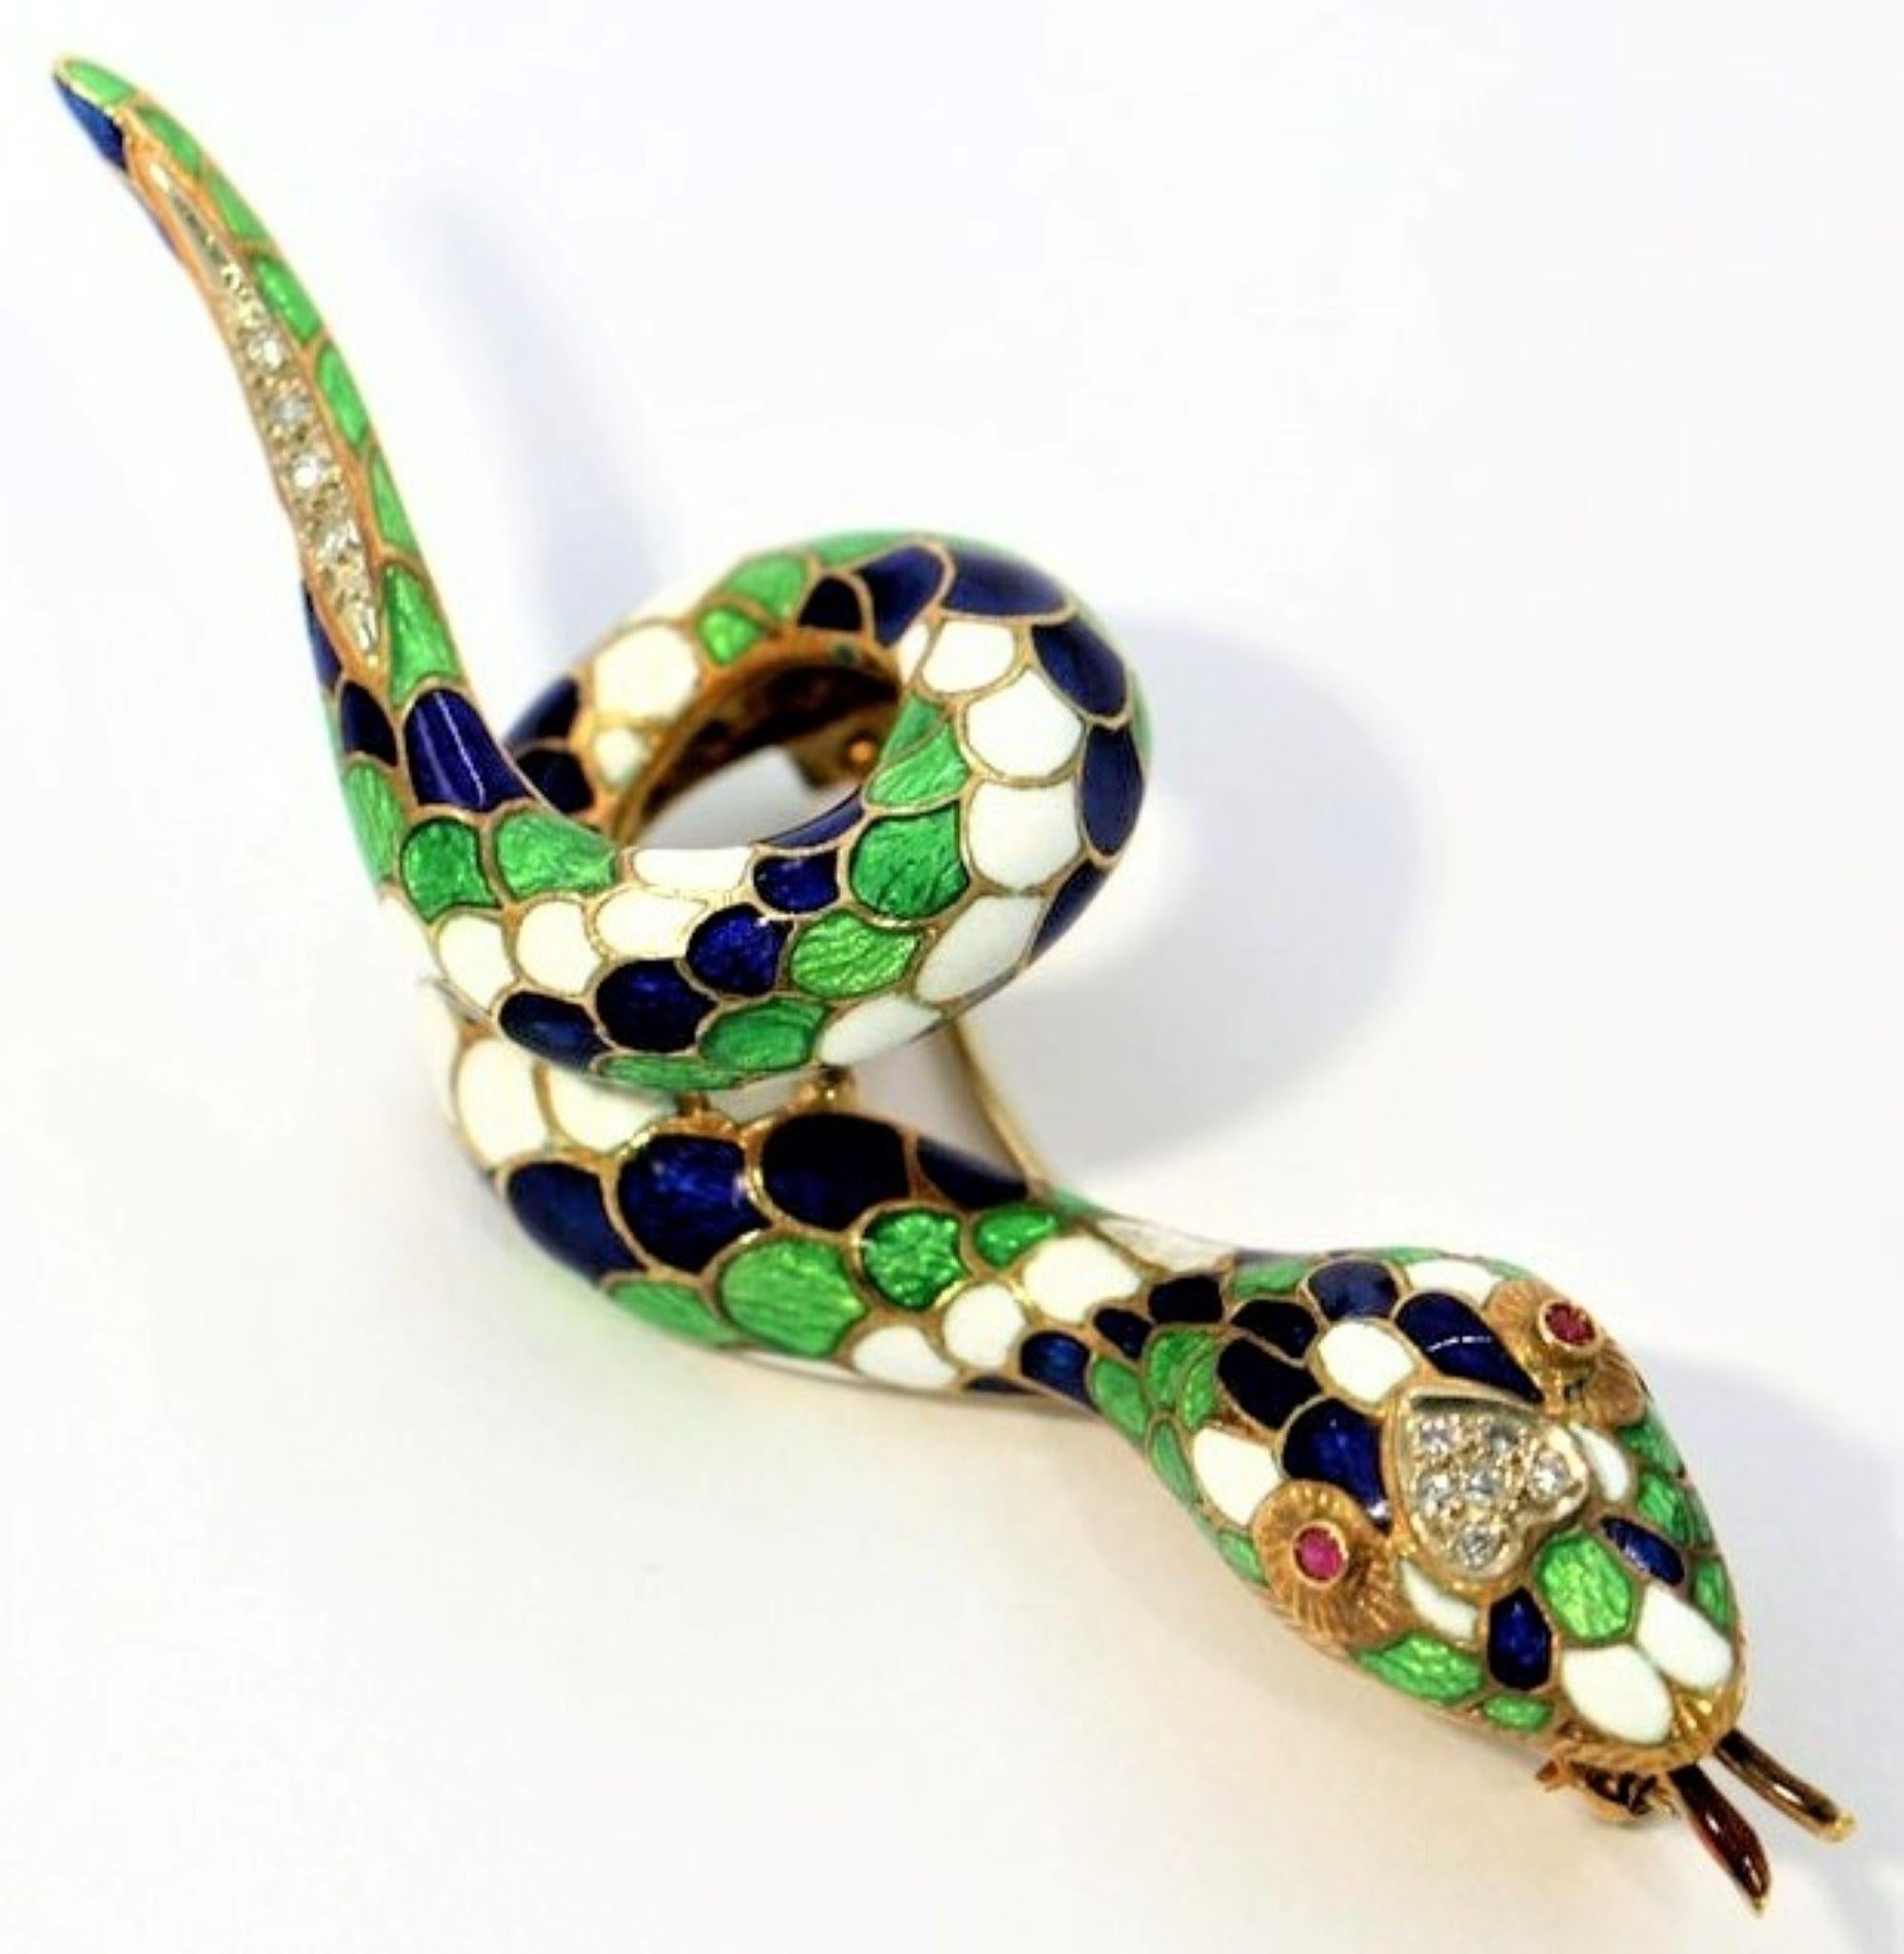 A gold, coiled, snake brooch with blue, green, and white enamel measuring one inch wide, and three inches long. The top of this serpent's head, and the tip of its tail are set with a total of 10 single cut diamonds weighing a total of approximately